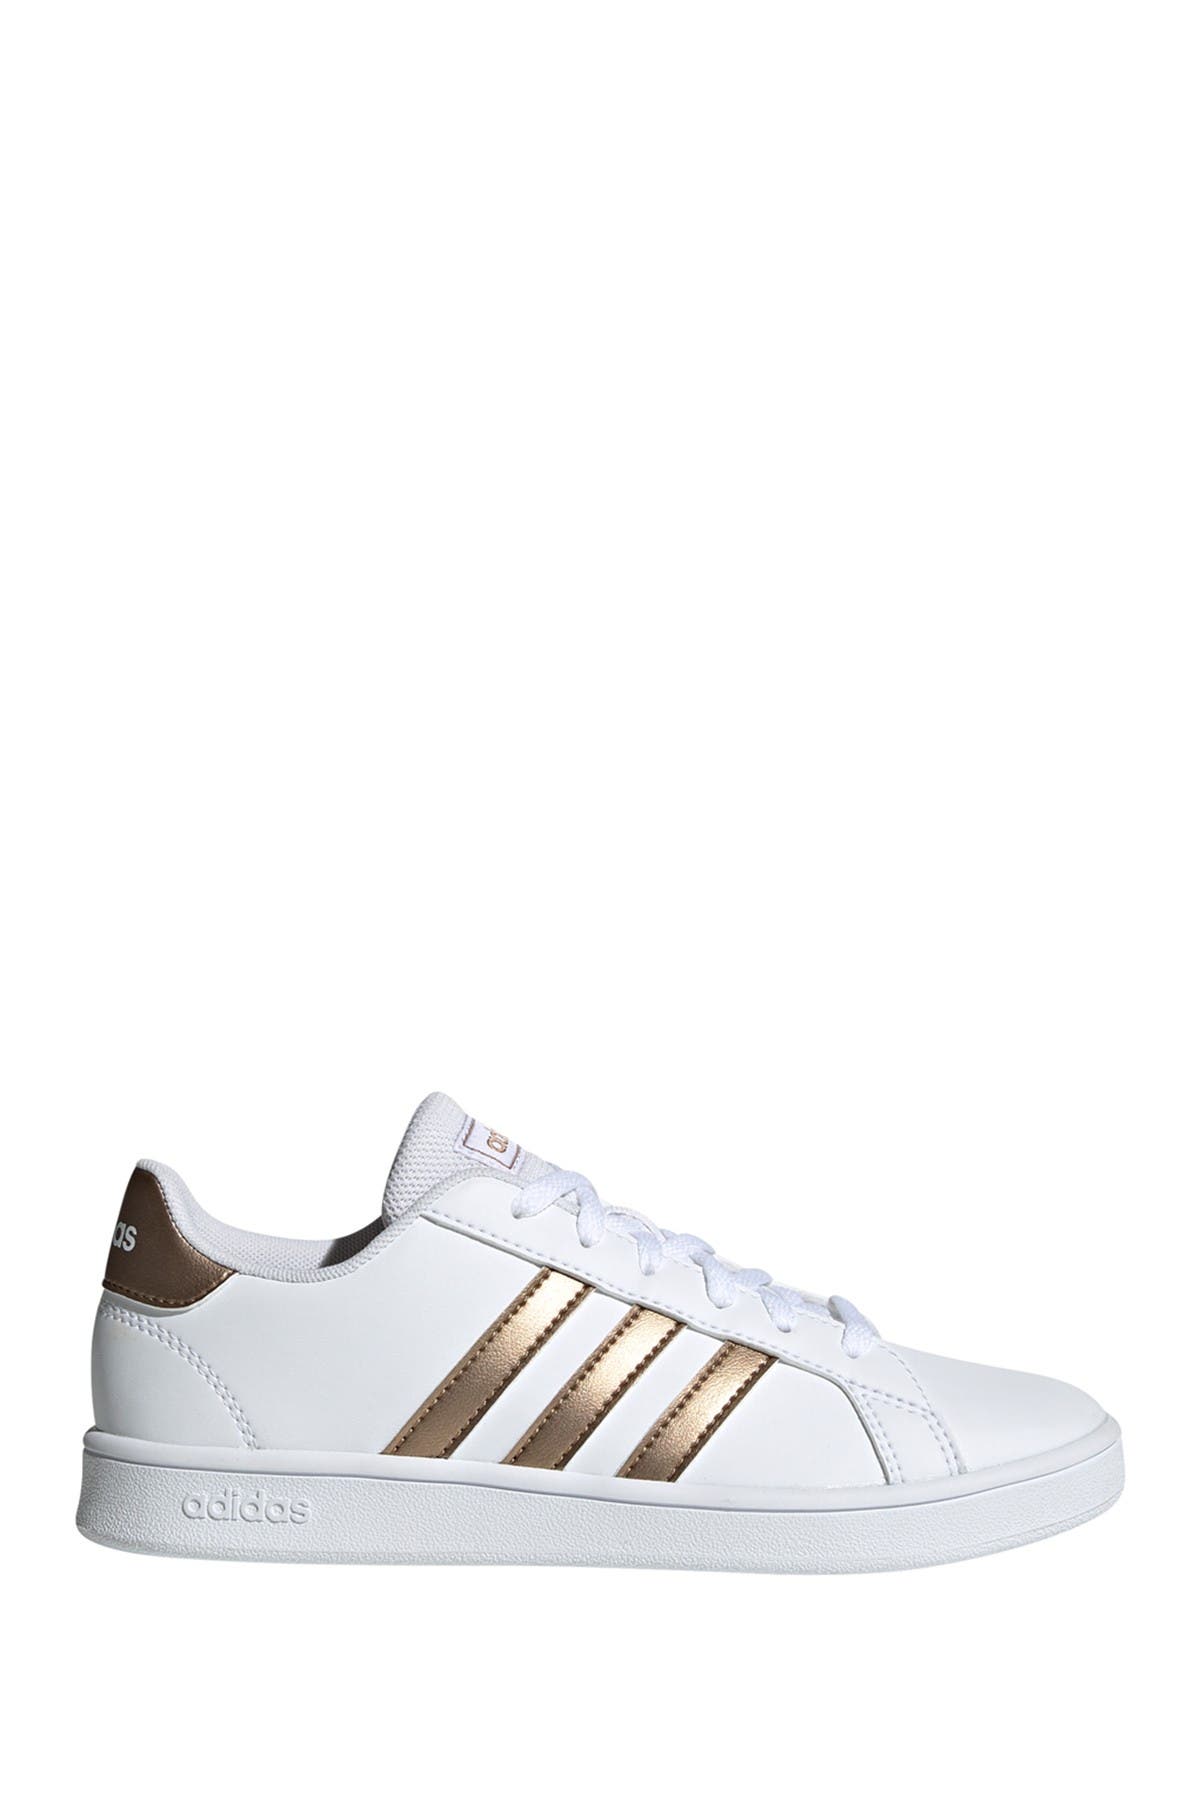 adidas kids grand court sneakers